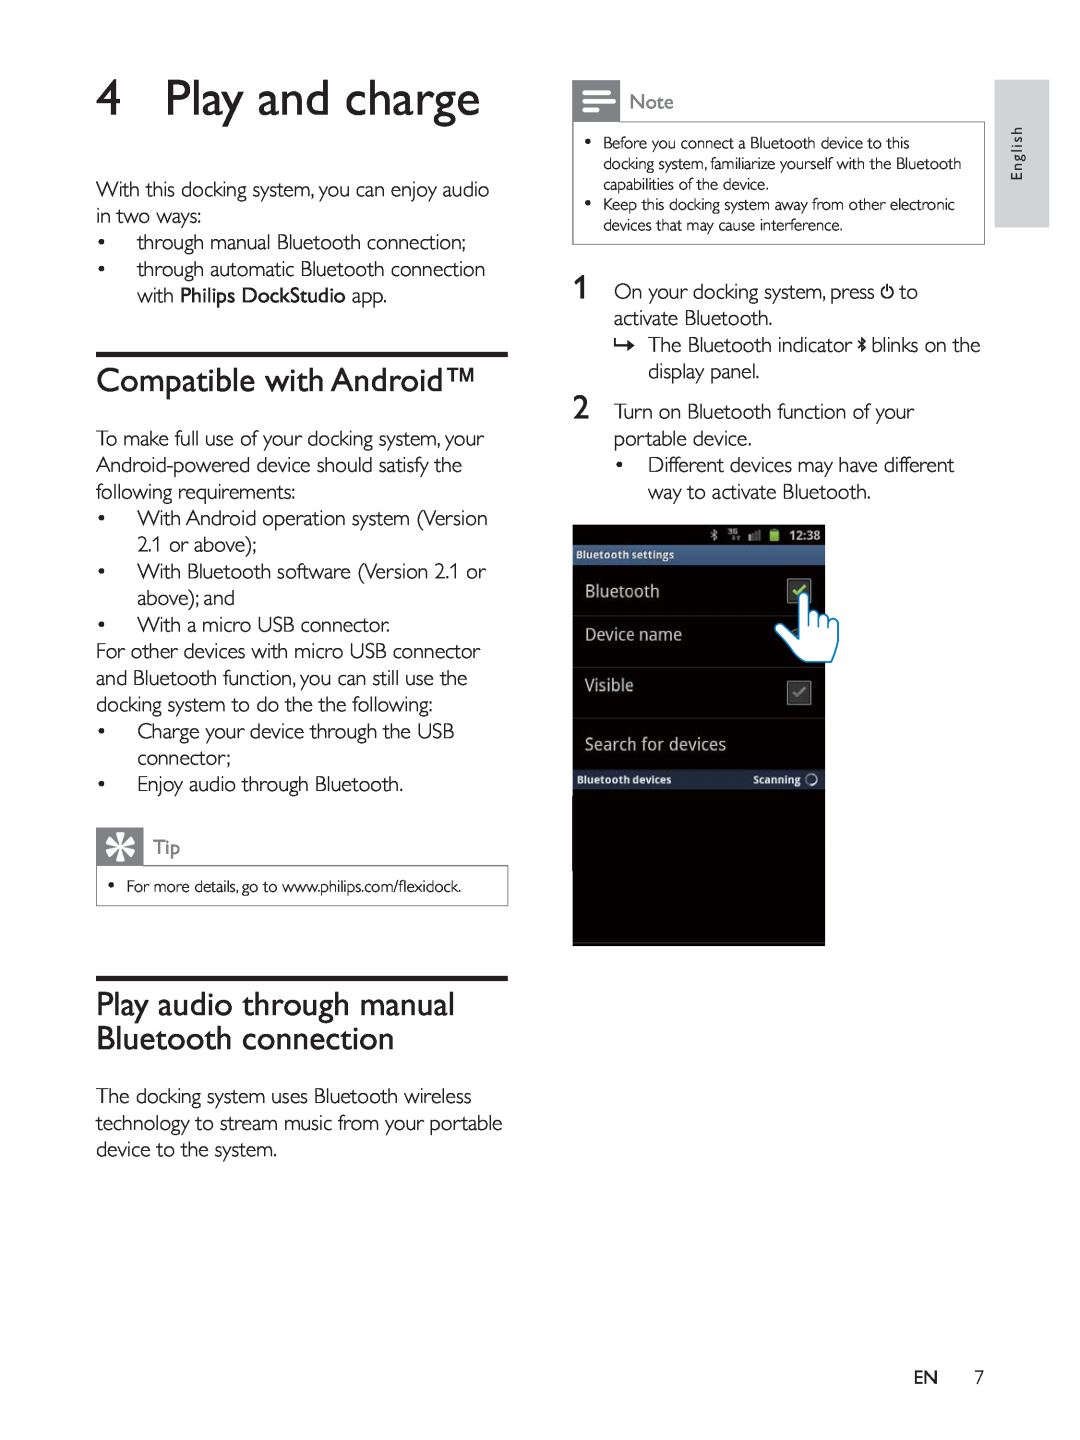 Philips AS140 user manual Play and charge, Compatible with Android, Play audio through manual Bluetooth connection 